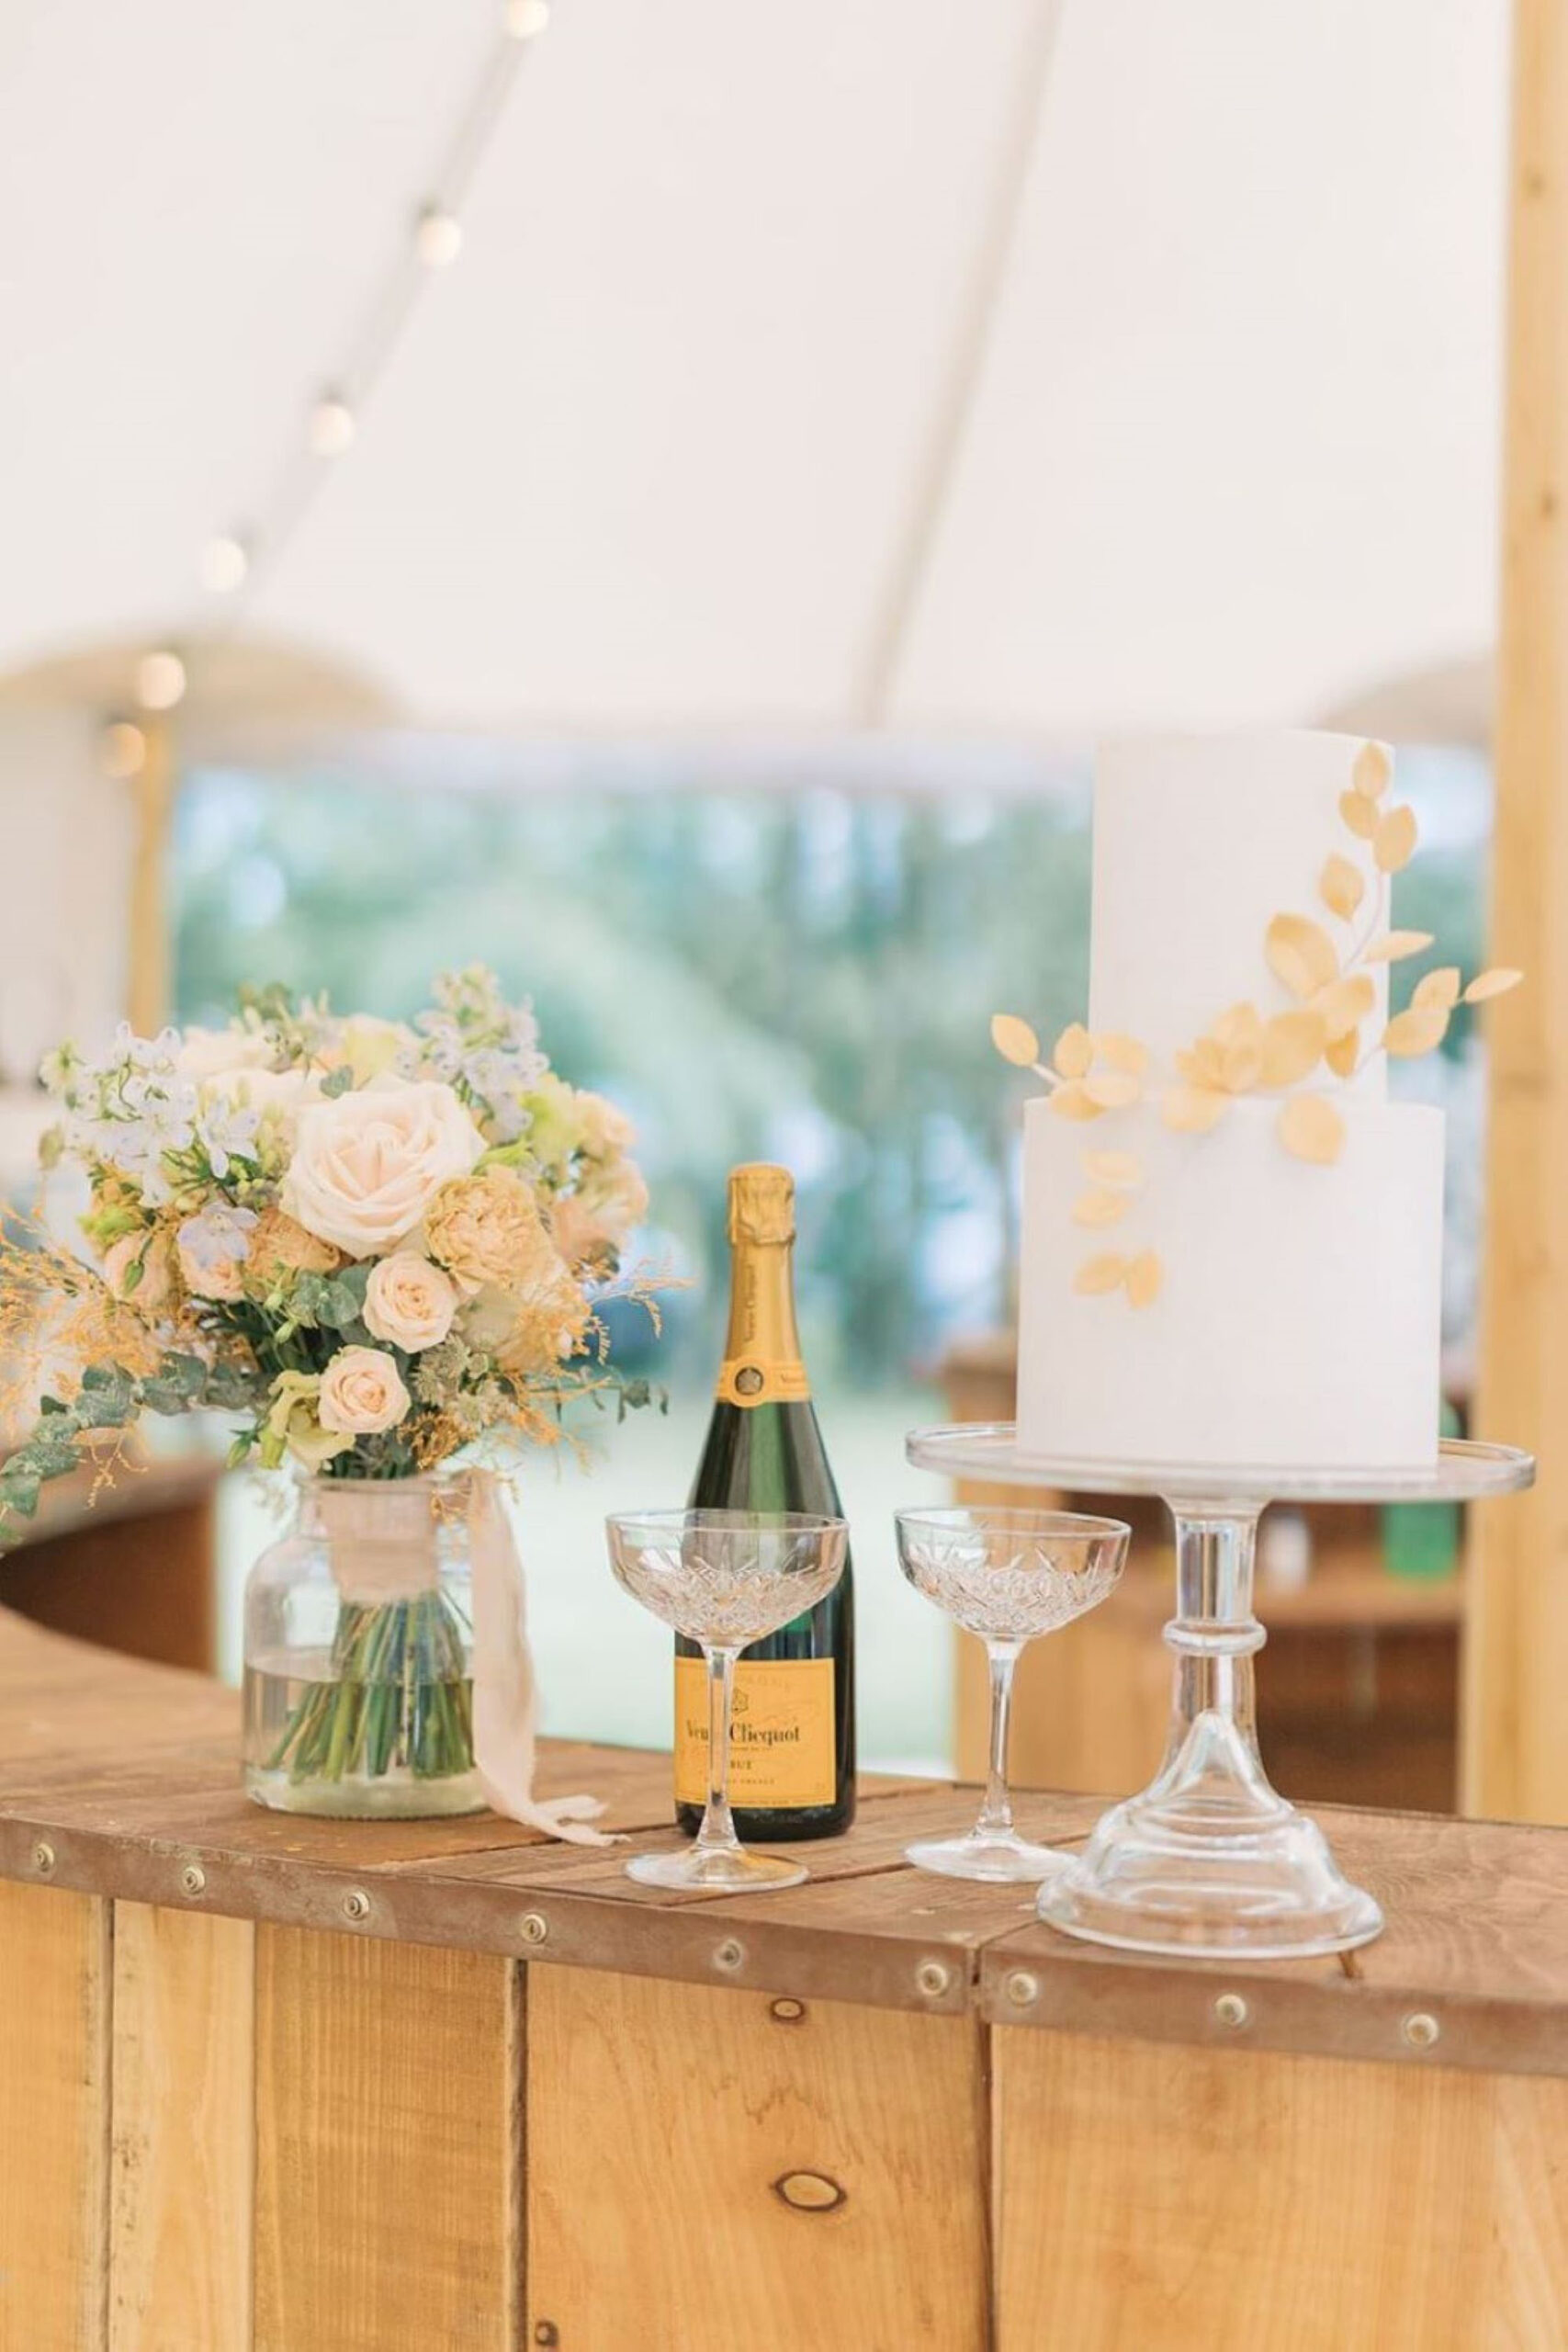 A wooden bar in a wedding Sperry tent, with a pale coral bouquet in a vase, a bottle of Veuve Cliquot champagne and two glasses, and a simple two tier wedding cake with gold leaf decoration